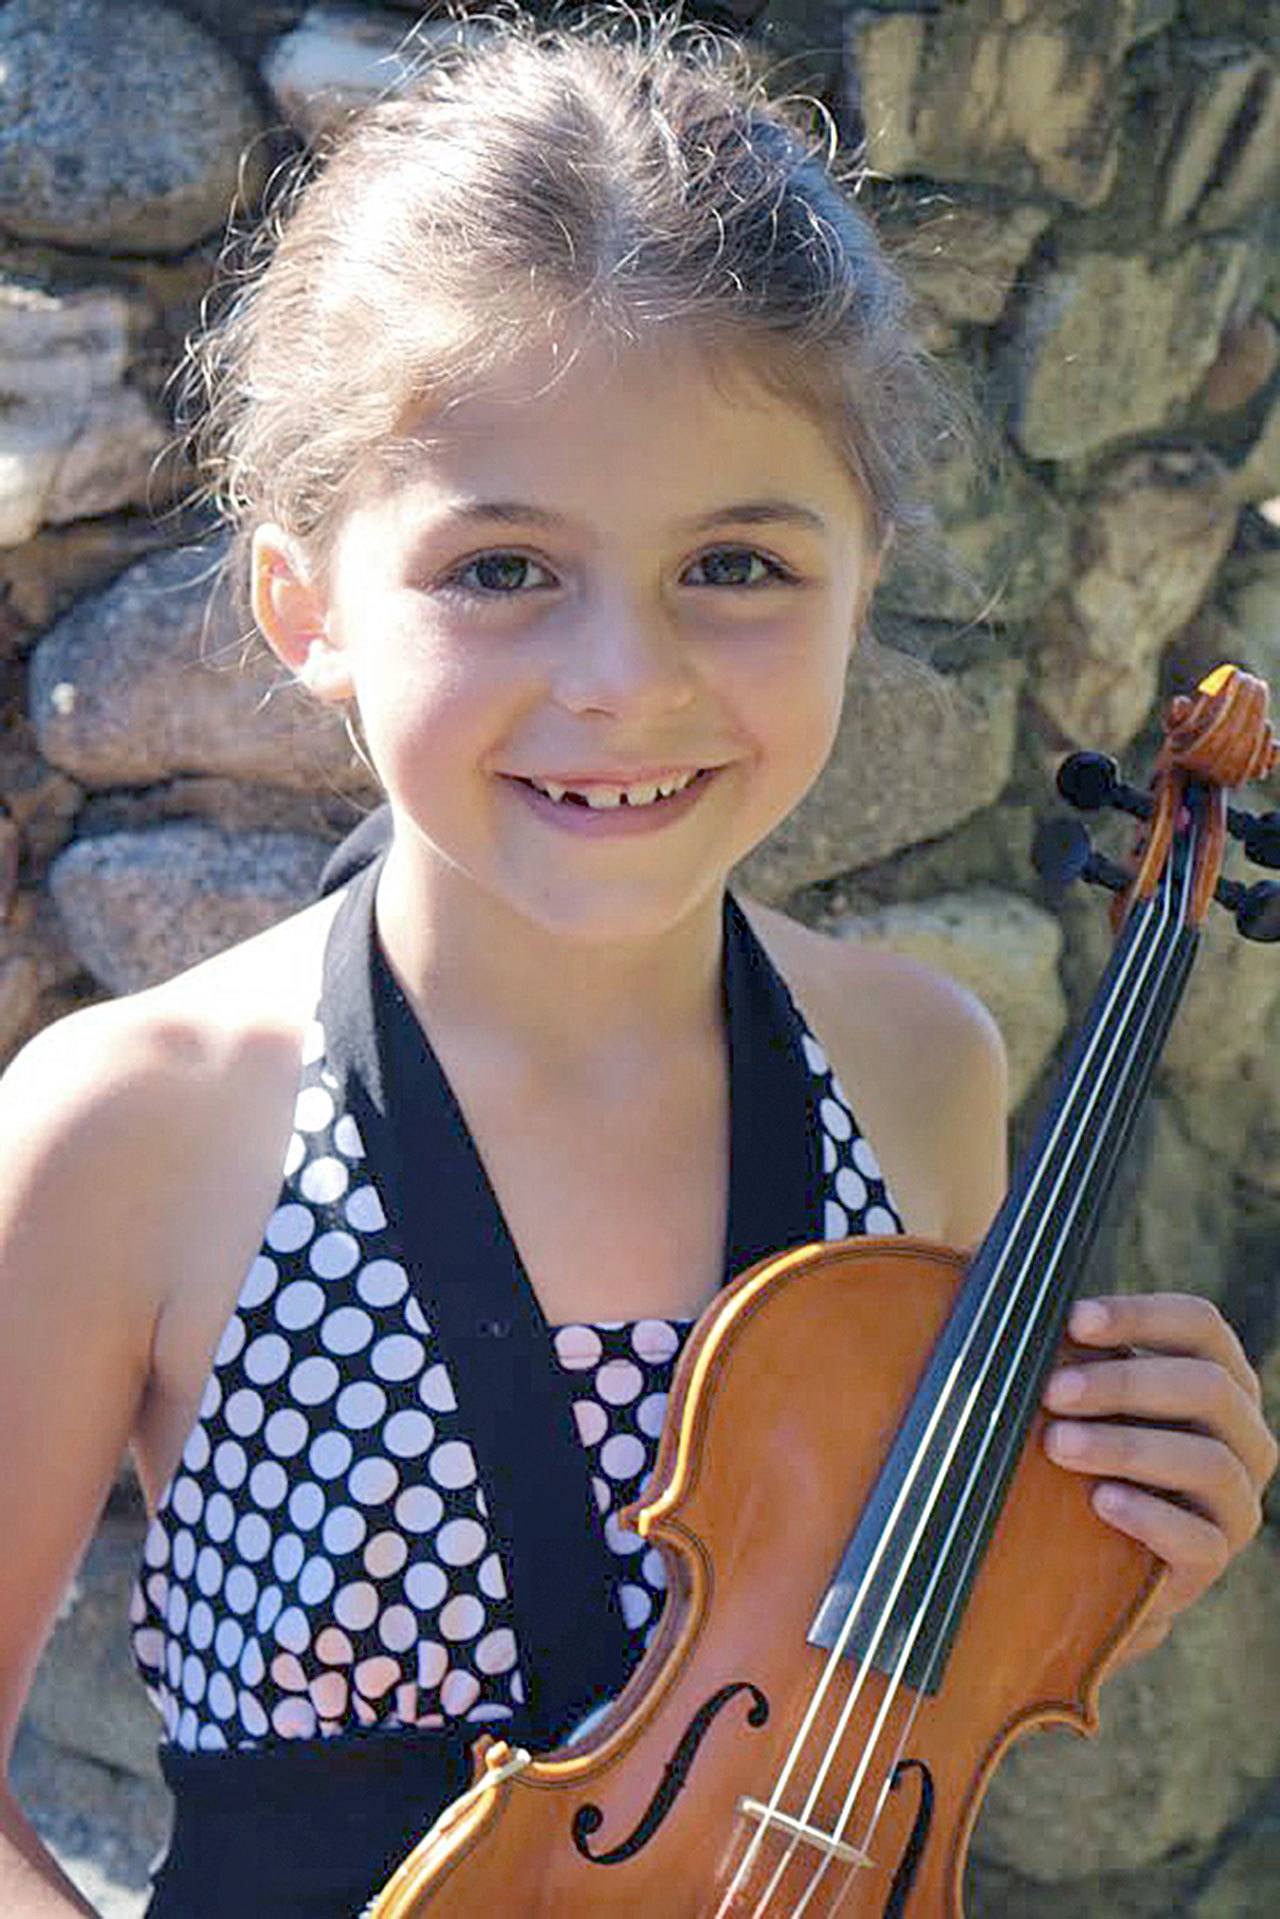 Bina Erickson, who received the first prize for violin in the Junior Young Artist Competition, will perform Saturday evening at C’est Si Bon Restaurant, 23 Cedar Park Drive. — Submitted.